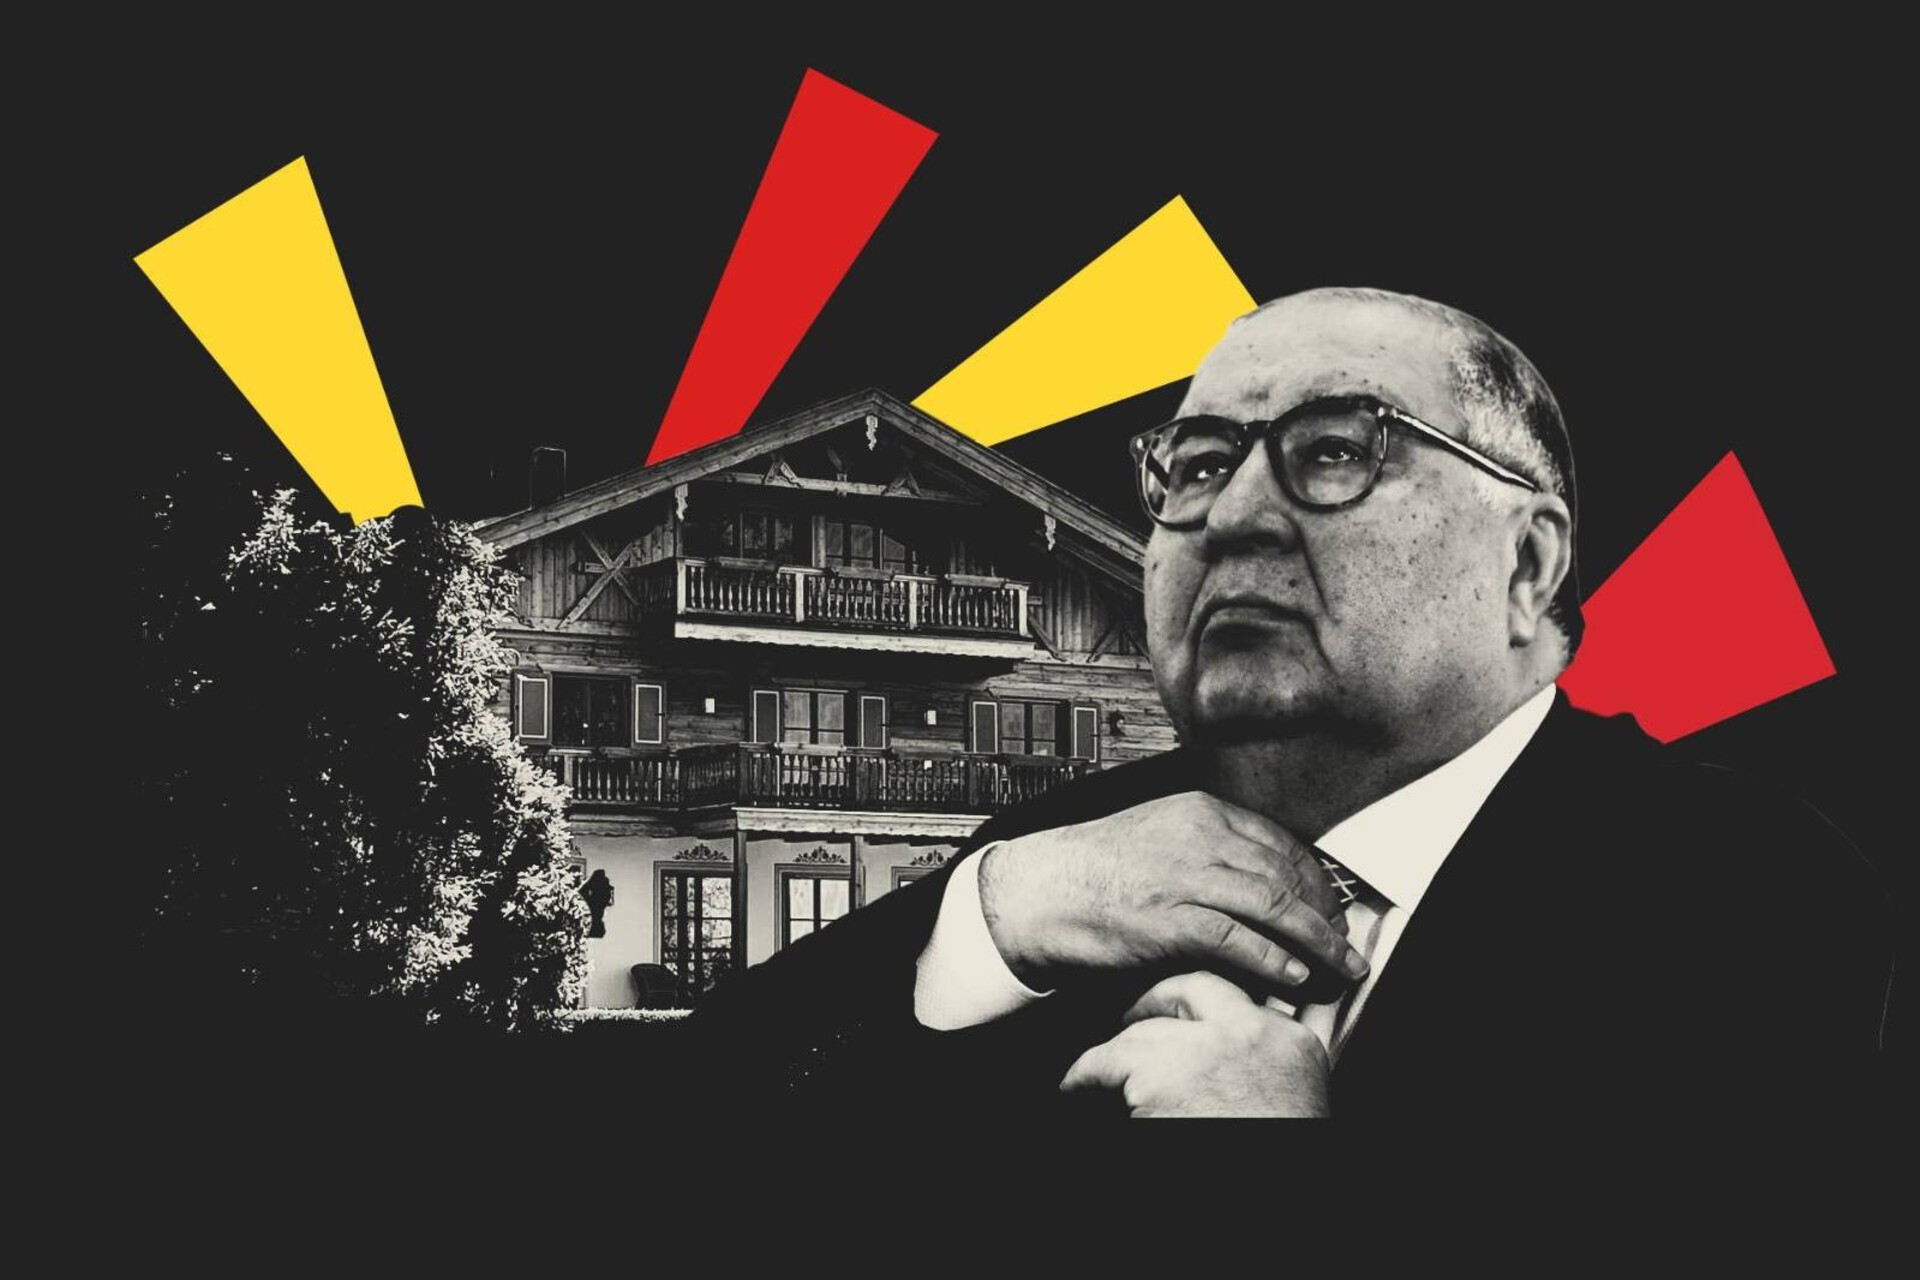 German Police Raid Residence of Russian Oligarch Alisher Usmanov; Tax Evasion and Money Laundering Suspected